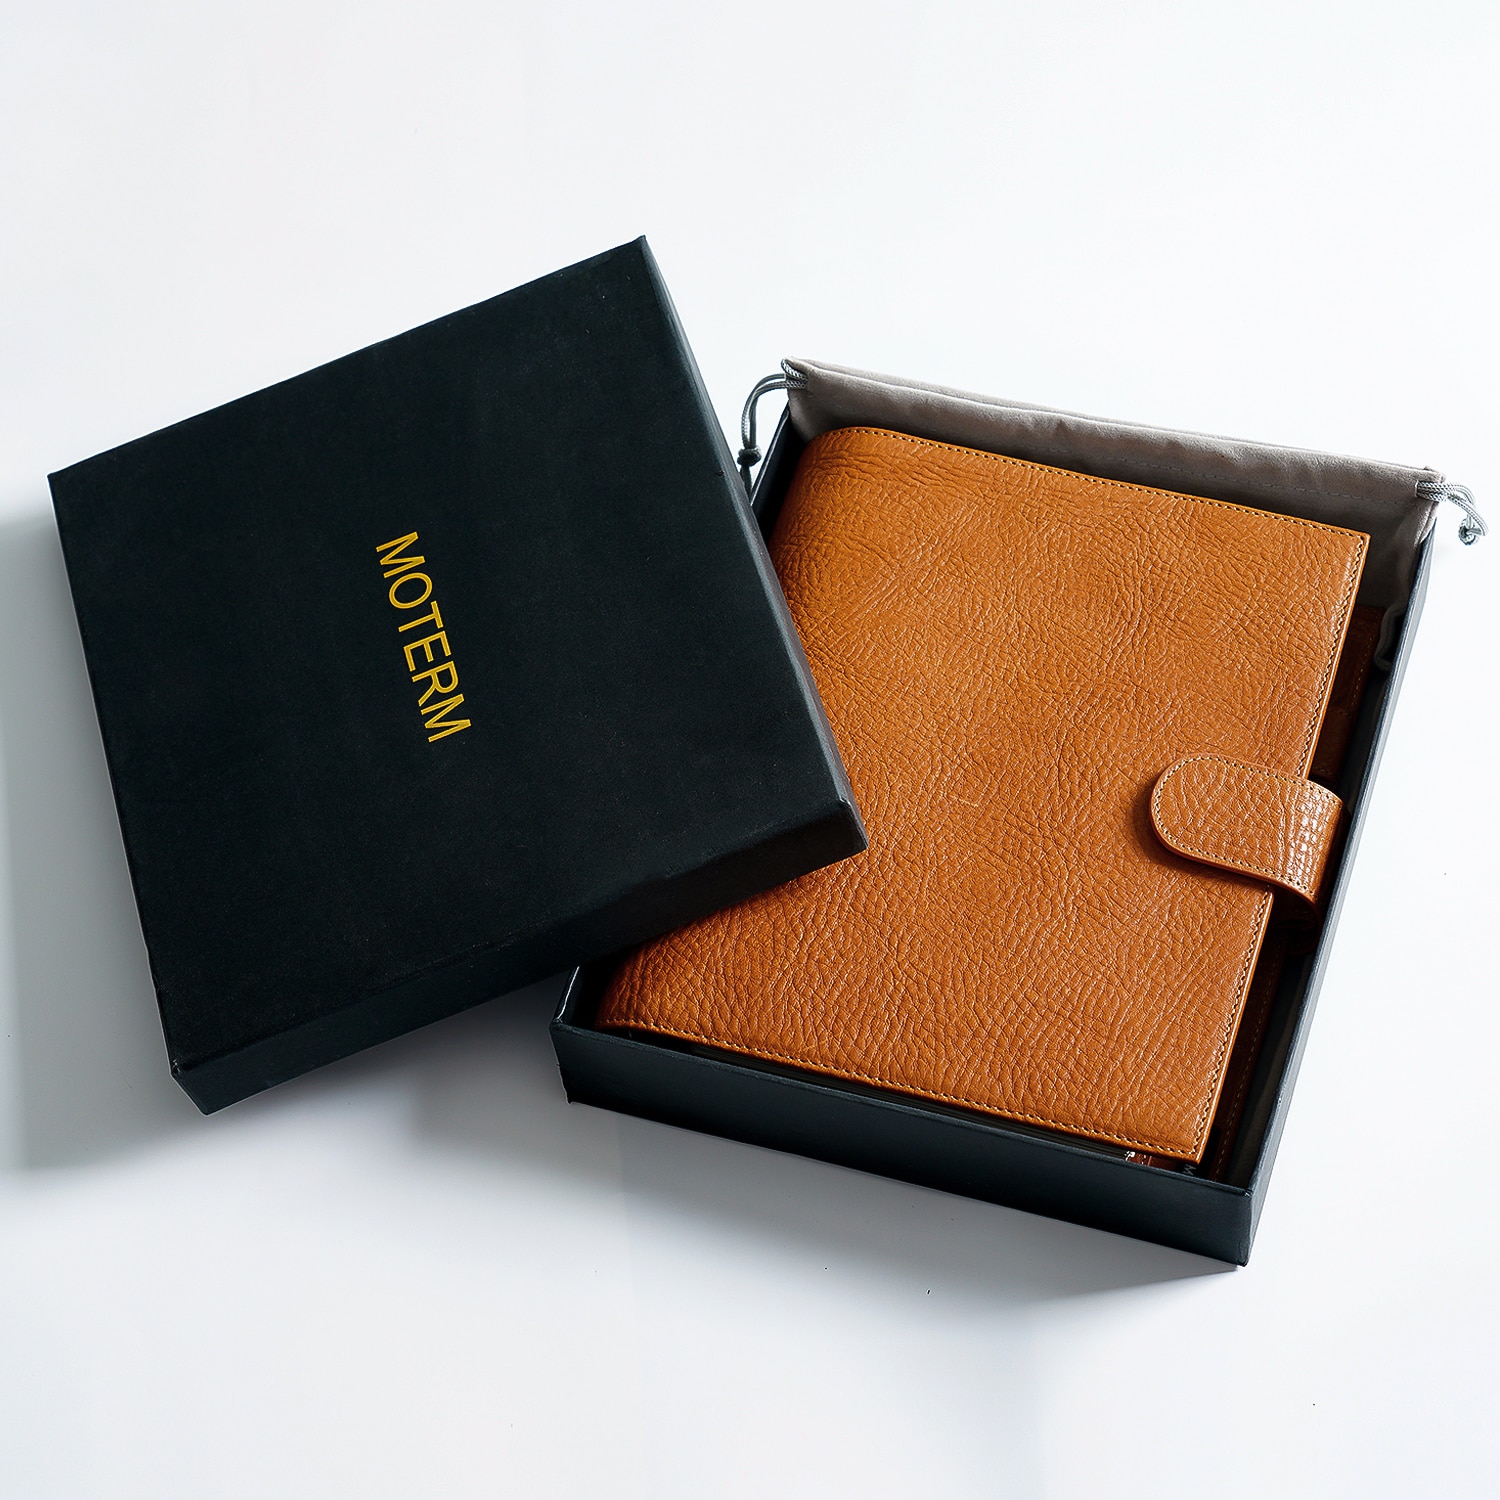 Pre-order Payment Link for Moterm Luxe 2.0 Rings Planner - A5 (Vegetable Tanned Leather) 5